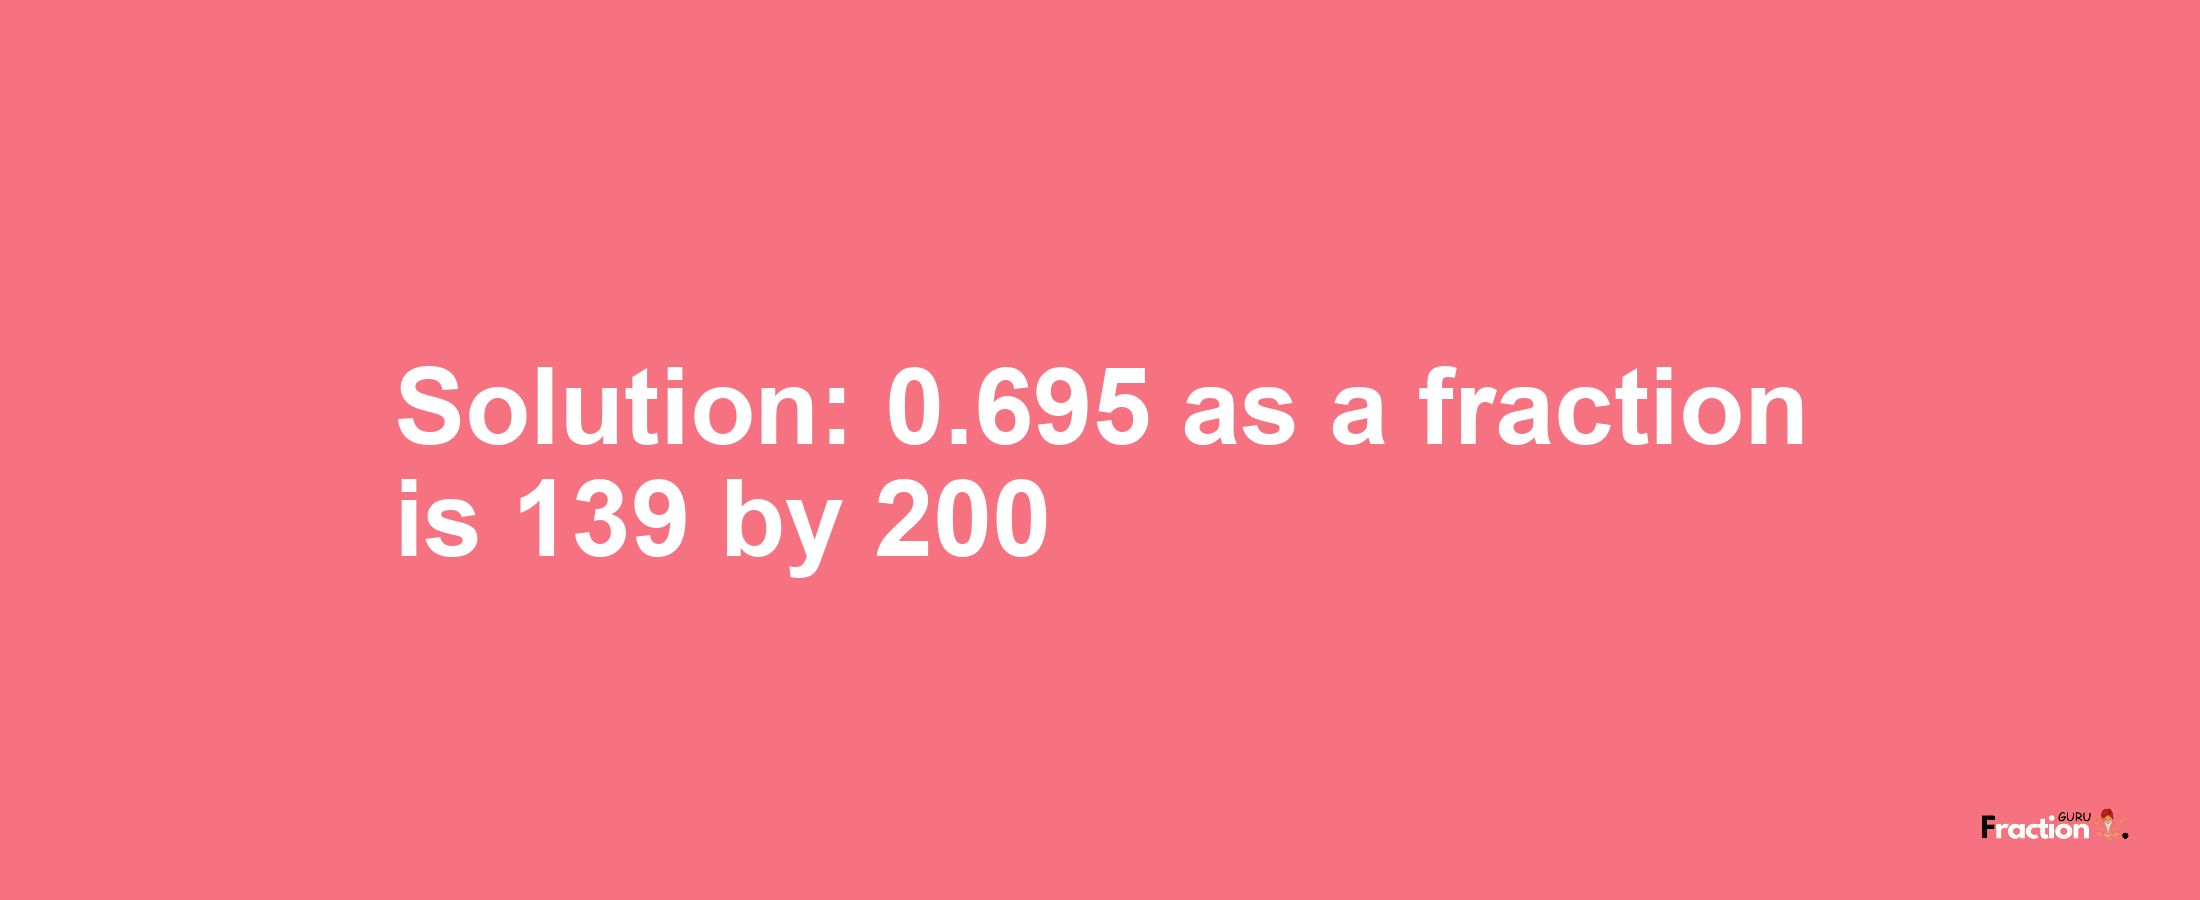 Solution:0.695 as a fraction is 139/200